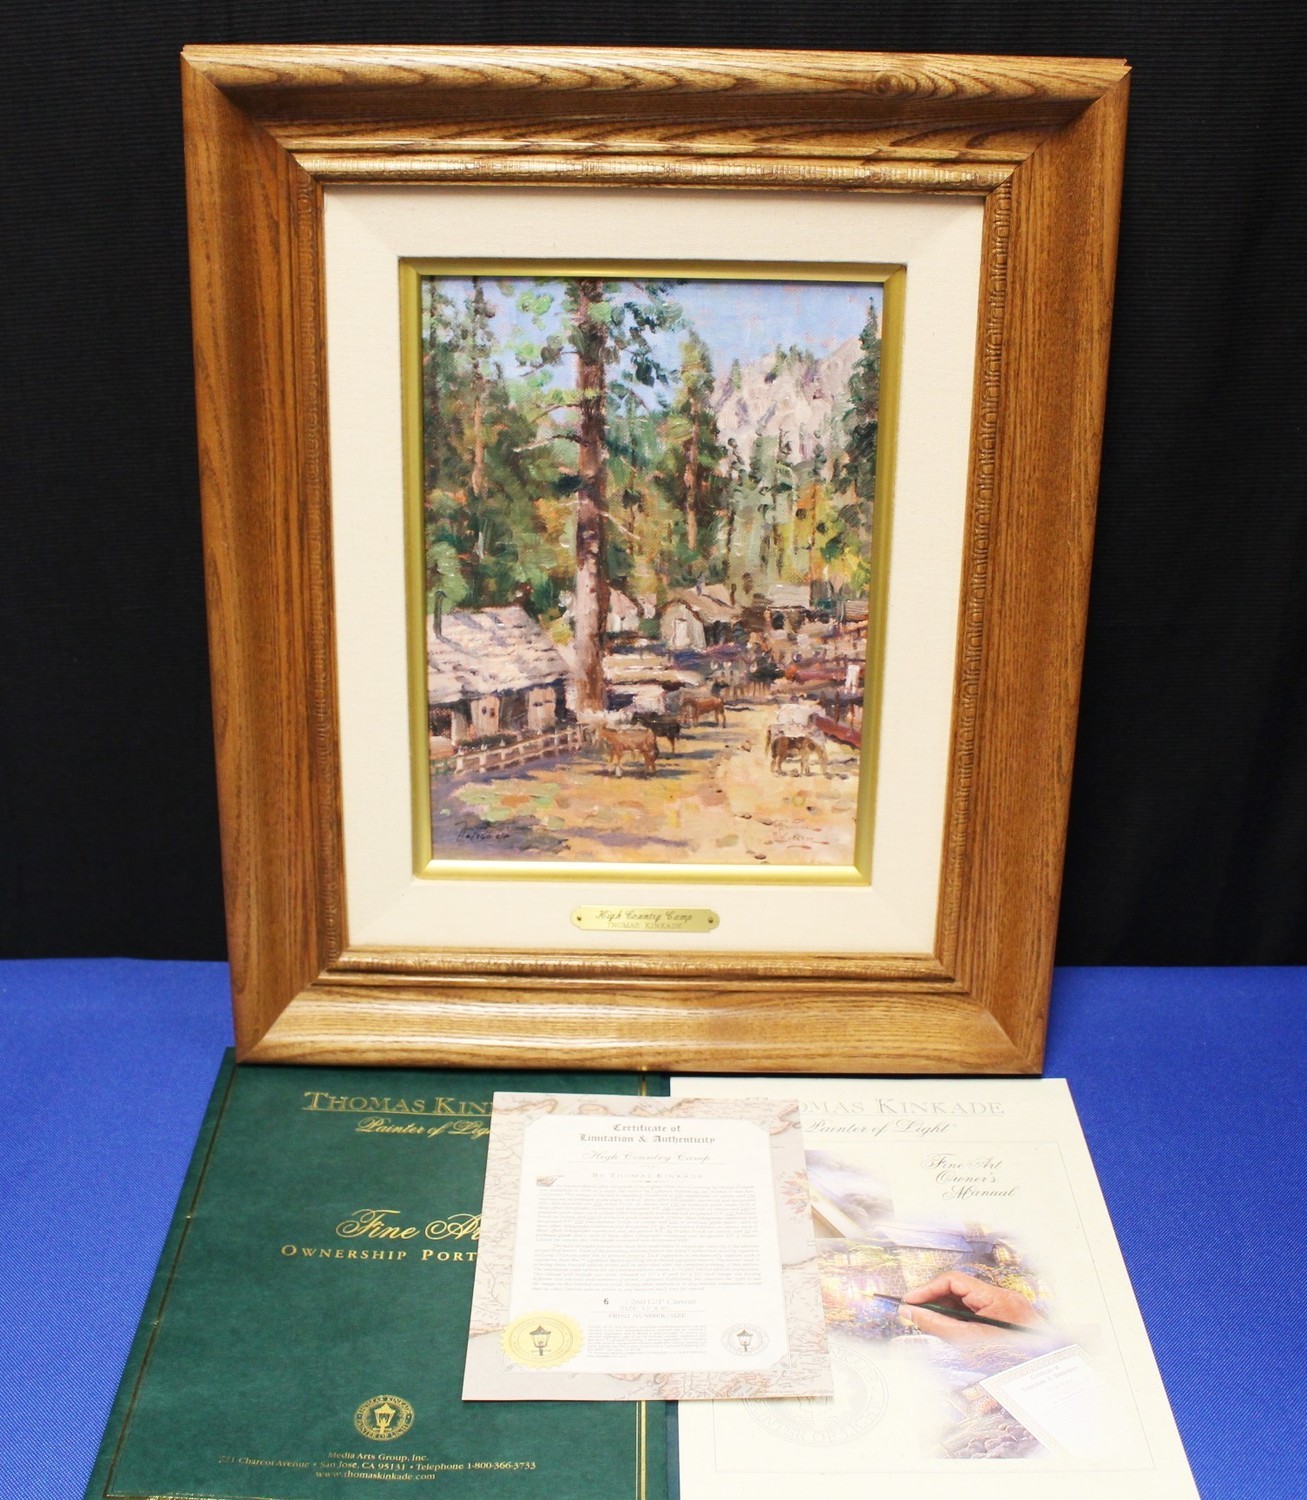 Thomas Kinkade "High Country Camp" 12 x 9 Lithograph on Canvas G/P #6/260